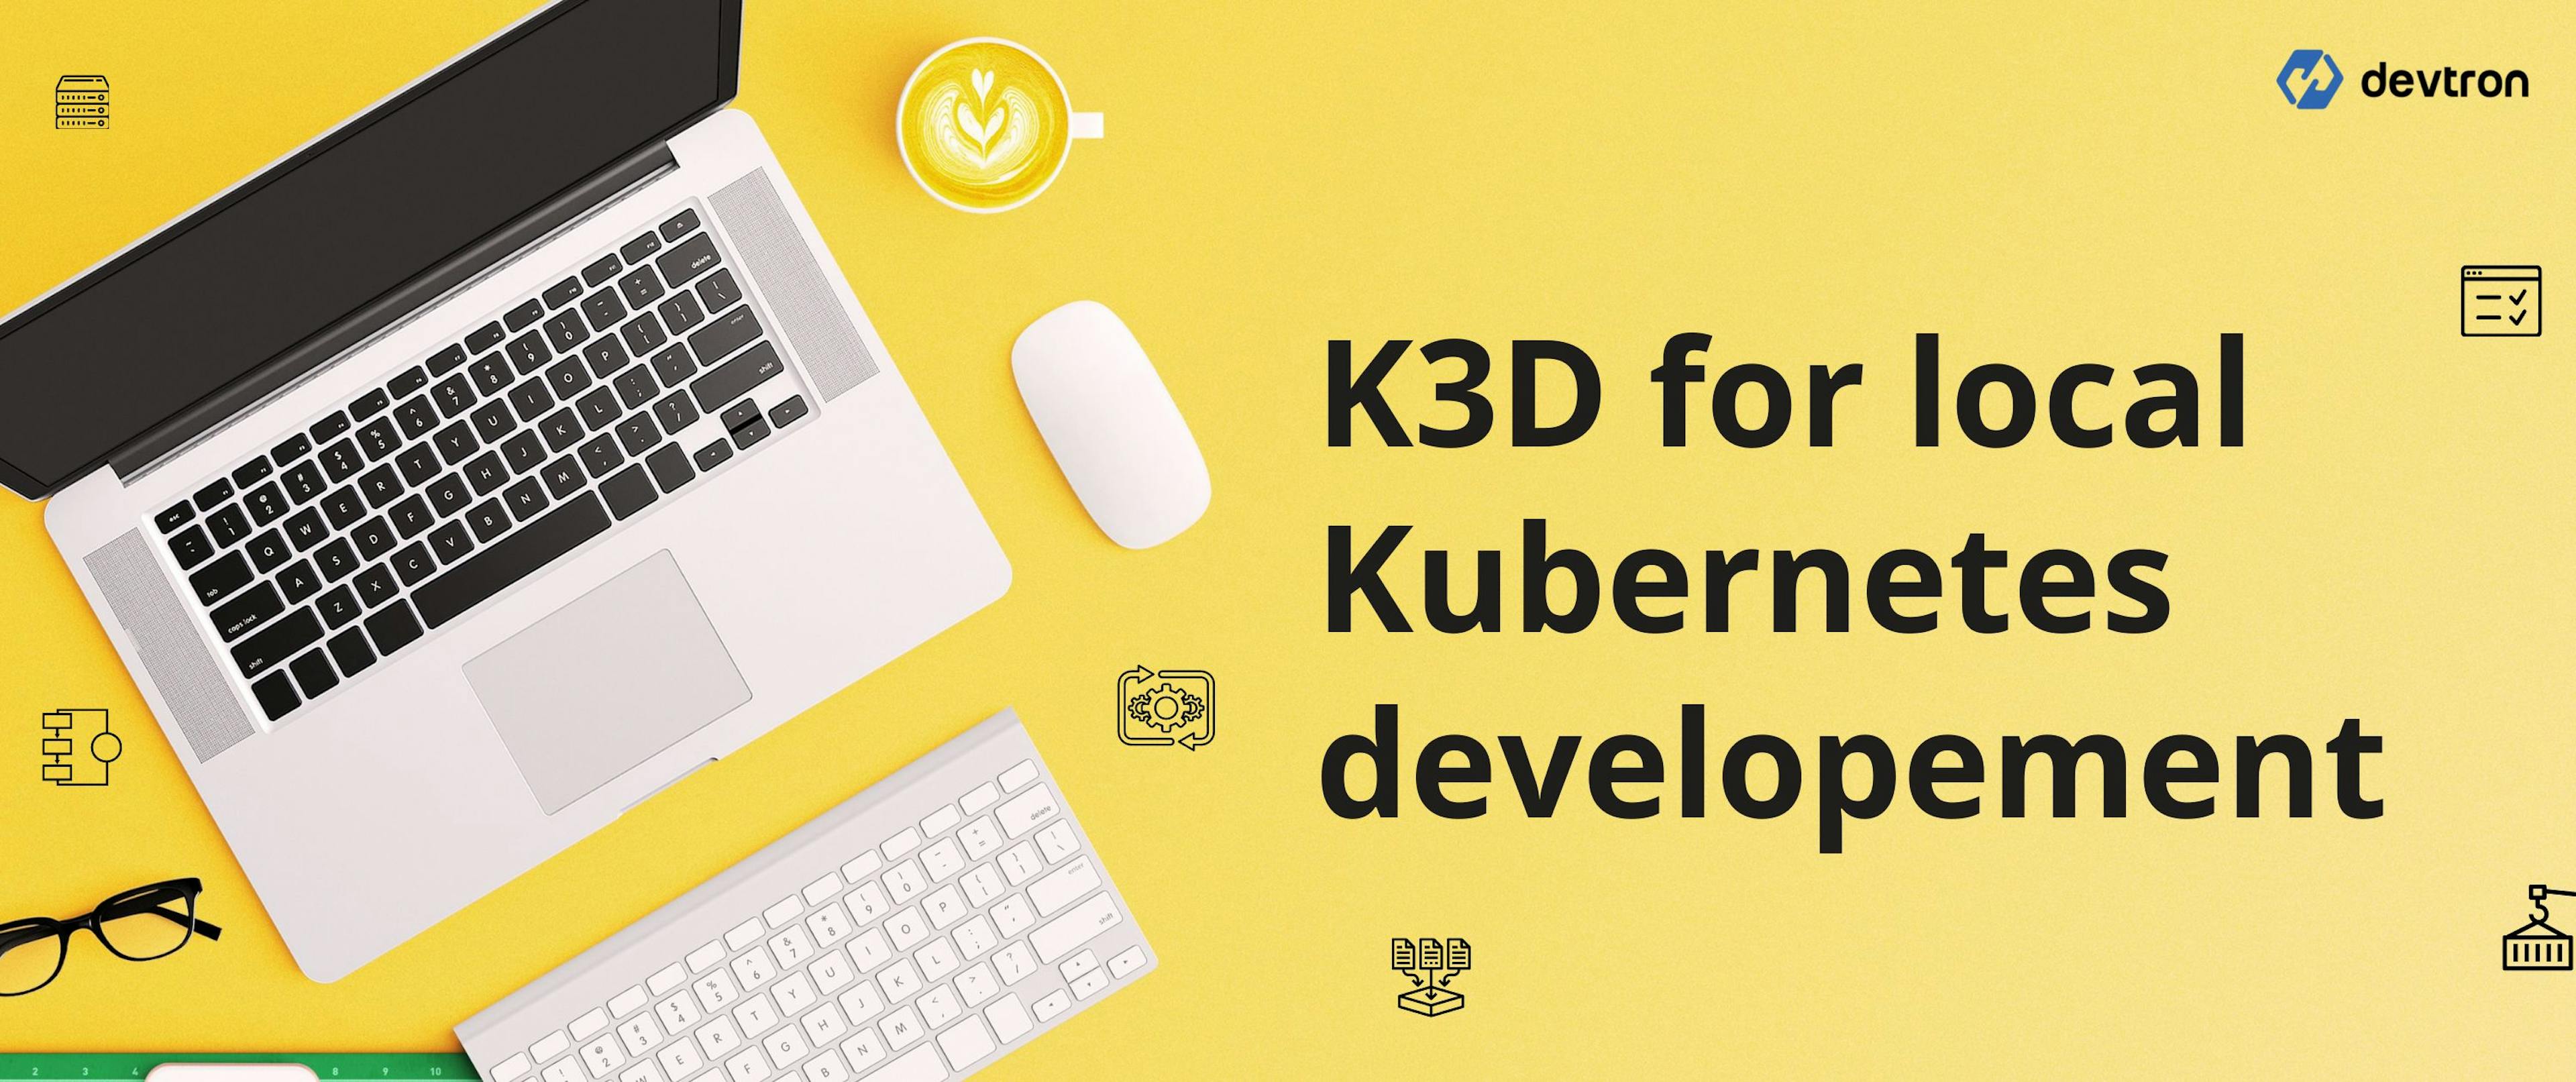 featured image - K3d for Local Kubernetes Development